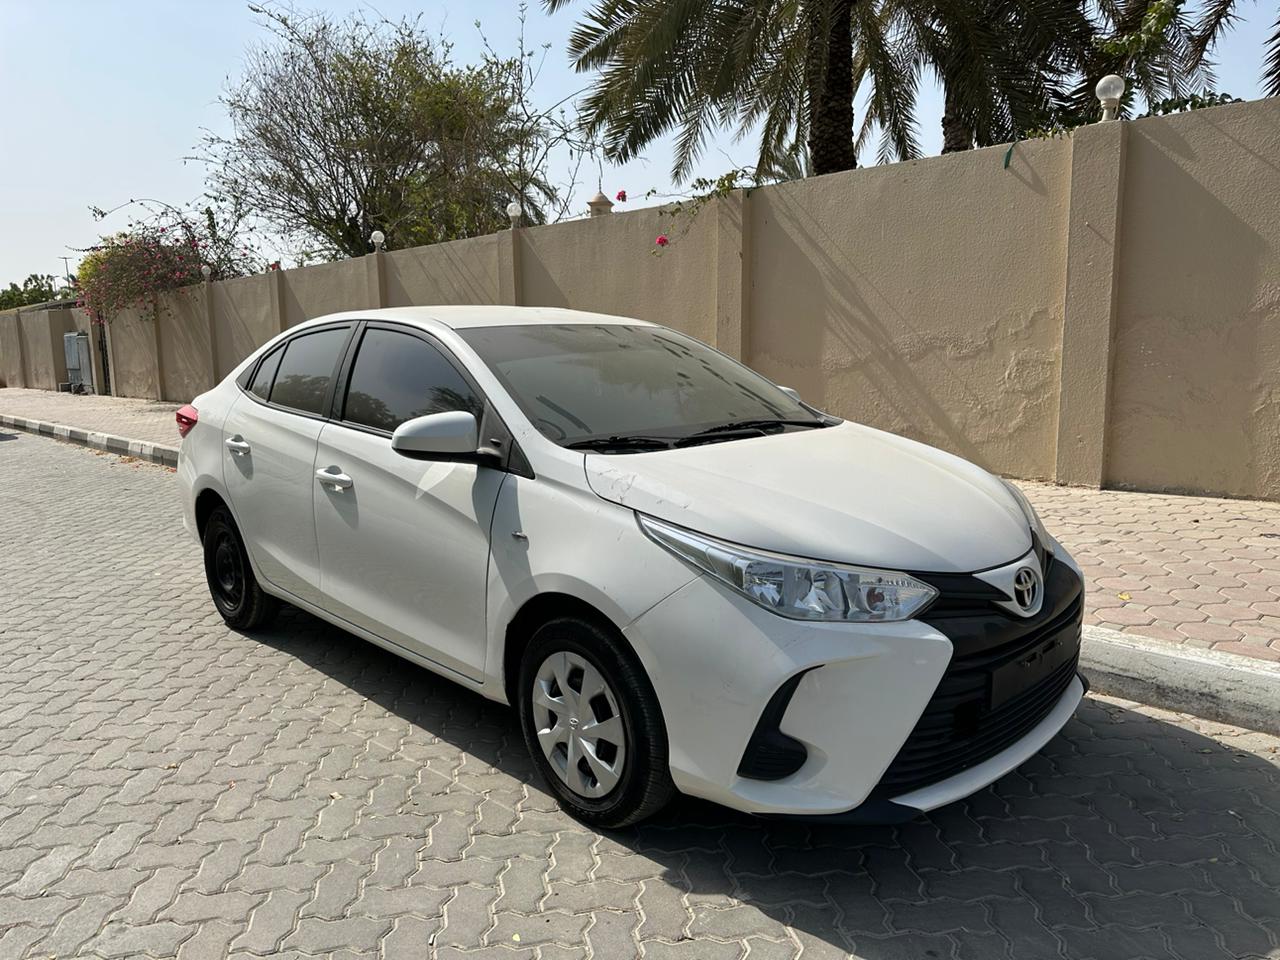 Toyota MODEL YEAR:2021 for sale-pic_5